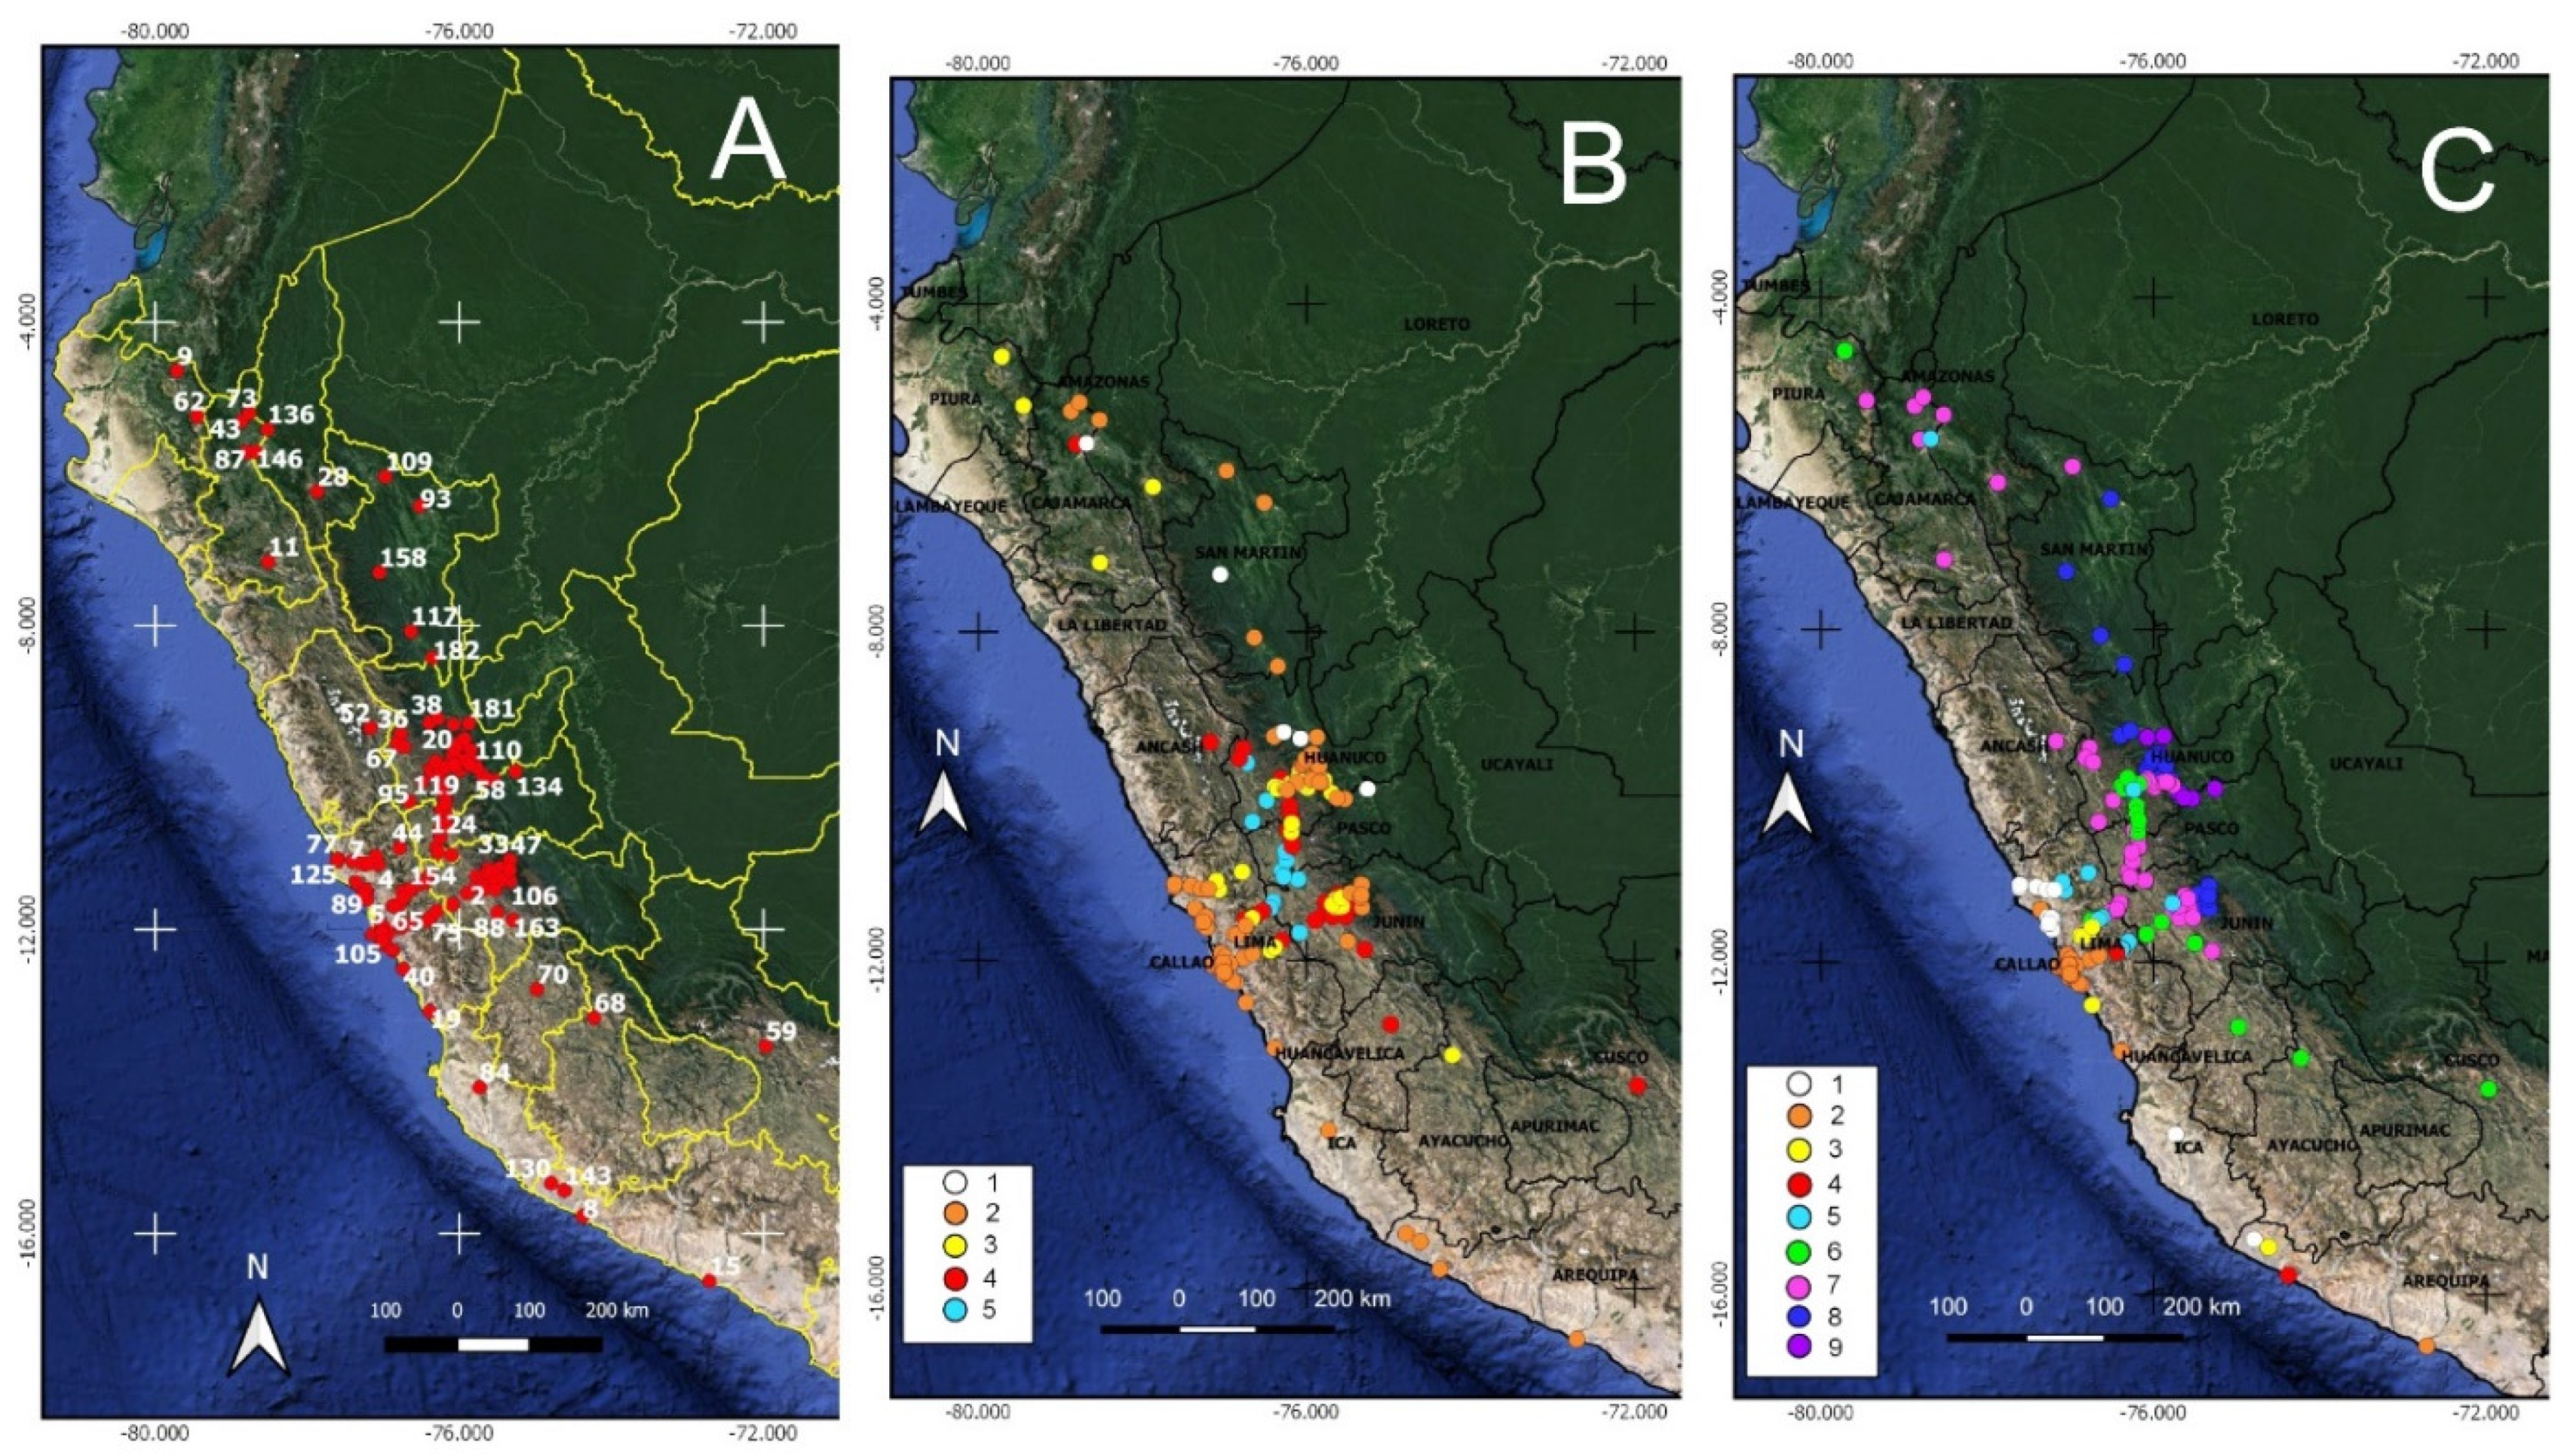 Biology Free Full-Text Biogeographical Relationships and Diversity in the Peruvian Flora Reported by Hipandoacute;lito Ruiz and Josandeacute; Pavandoacute;n Vegetation, Uses and Anthropology